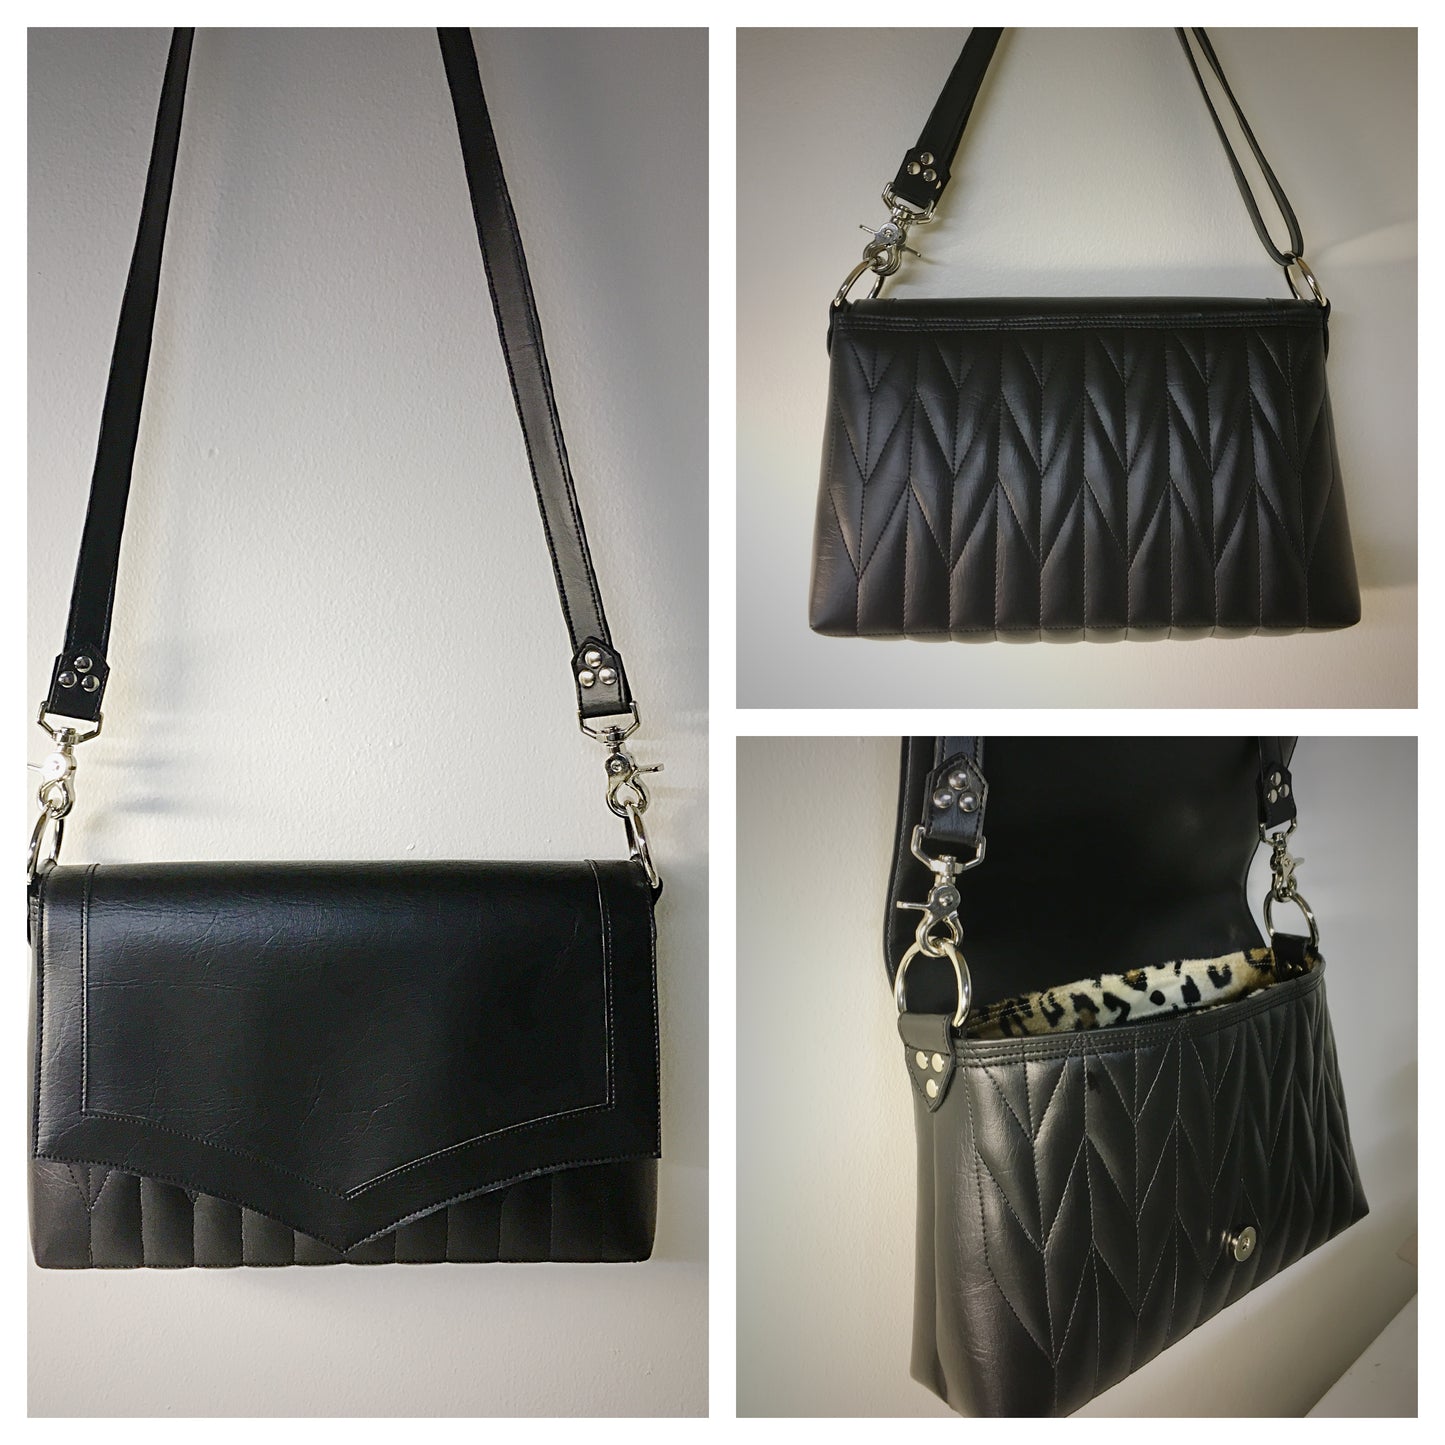 Saddle Bag with Firebird Pleating - Black with Leopard Lining and Cross Body Strap